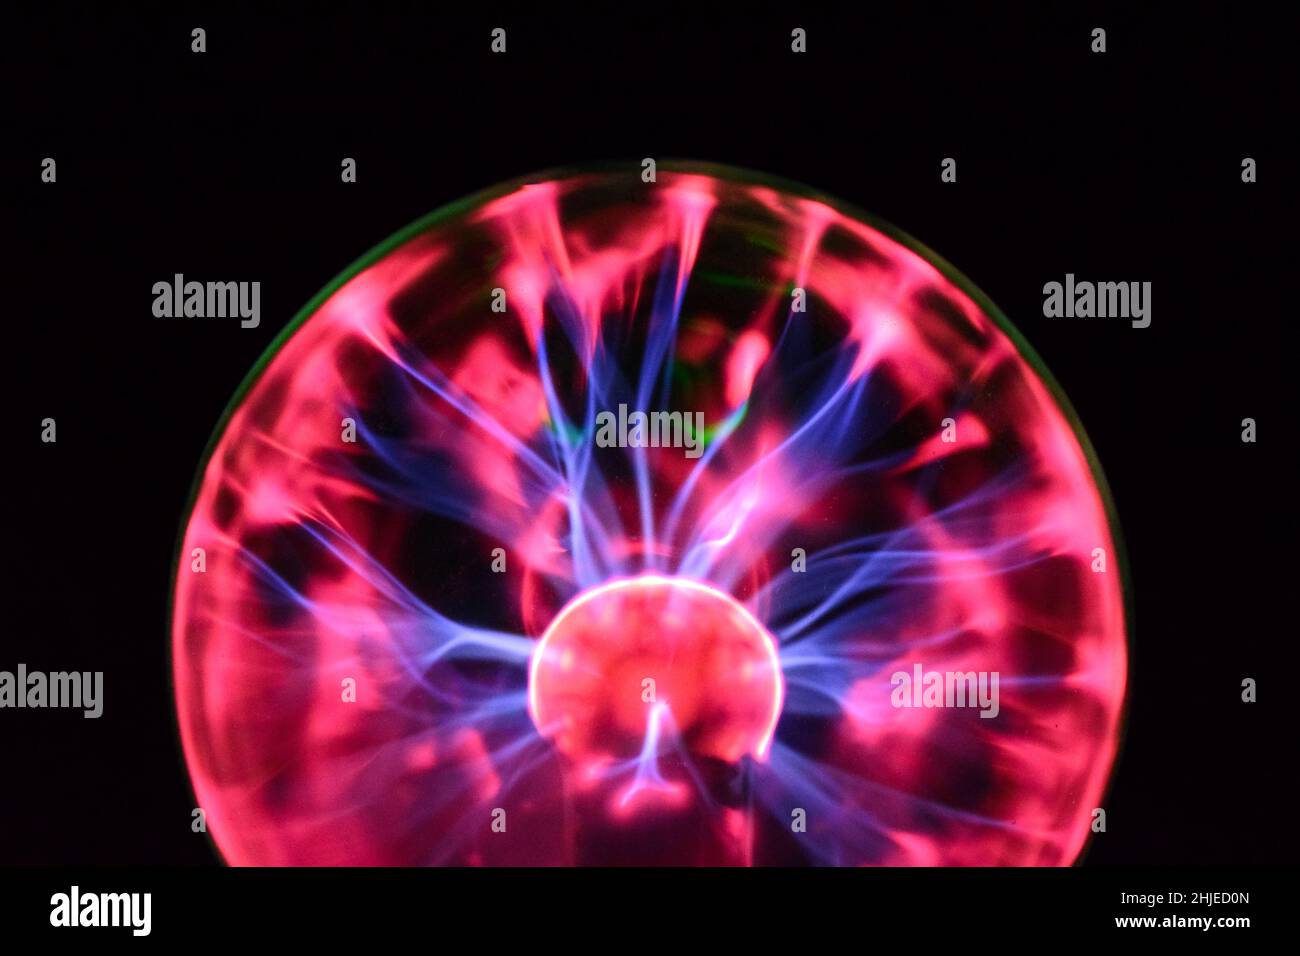 Plasma ball with iridescent lightning in different colors on a very dark background Stock Photo